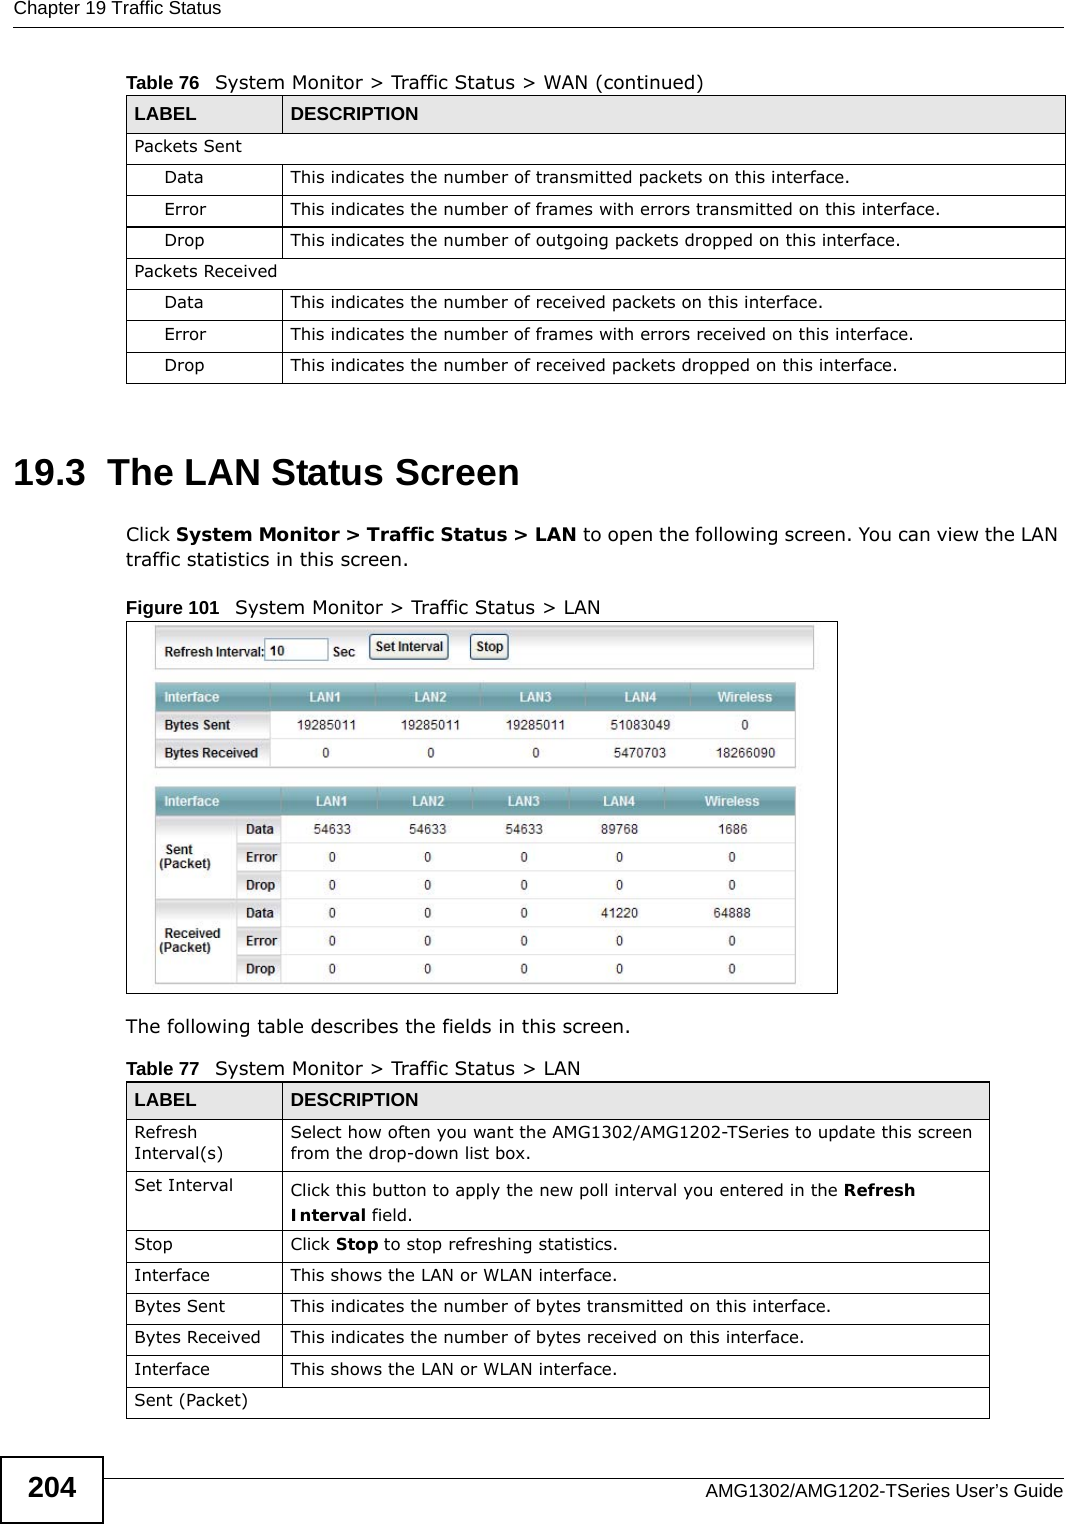 Chapter 19 Traffic StatusAMG1302/AMG1202-TSeries User’s Guide20419.3  The LAN Status ScreenClick System Monitor &gt; Traffic Status &gt; LAN to open the following screen. You can view the LAN traffic statistics in this screen.Figure 101   System Monitor &gt; Traffic Status &gt; LANThe following table describes the fields in this screen.   Packets Sent Data  This indicates the number of transmitted packets on this interface.Error This indicates the number of frames with errors transmitted on this interface.Drop This indicates the number of outgoing packets dropped on this interface.Packets ReceivedData  This indicates the number of received packets on this interface.Error This indicates the number of frames with errors received on this interface.Drop This indicates the number of received packets dropped on this interface.Table 76   System Monitor &gt; Traffic Status &gt; WAN (continued)LABEL DESCRIPTIONTable 77   System Monitor &gt; Traffic Status &gt; LANLABEL DESCRIPTIONRefresh Interval(s)Select how often you want the AMG1302/AMG1202-TSeries to update this screen from the drop-down list box.Set Interval Click this button to apply the new poll interval you entered in the Refresh Interval field.Stop Click Stop to stop refreshing statistics.Interface This shows the LAN or WLAN interface. Bytes Sent This indicates the number of bytes transmitted on this interface.Bytes Received This indicates the number of bytes received on this interface.Interface This shows the LAN or WLAN interface. Sent (Packet)  